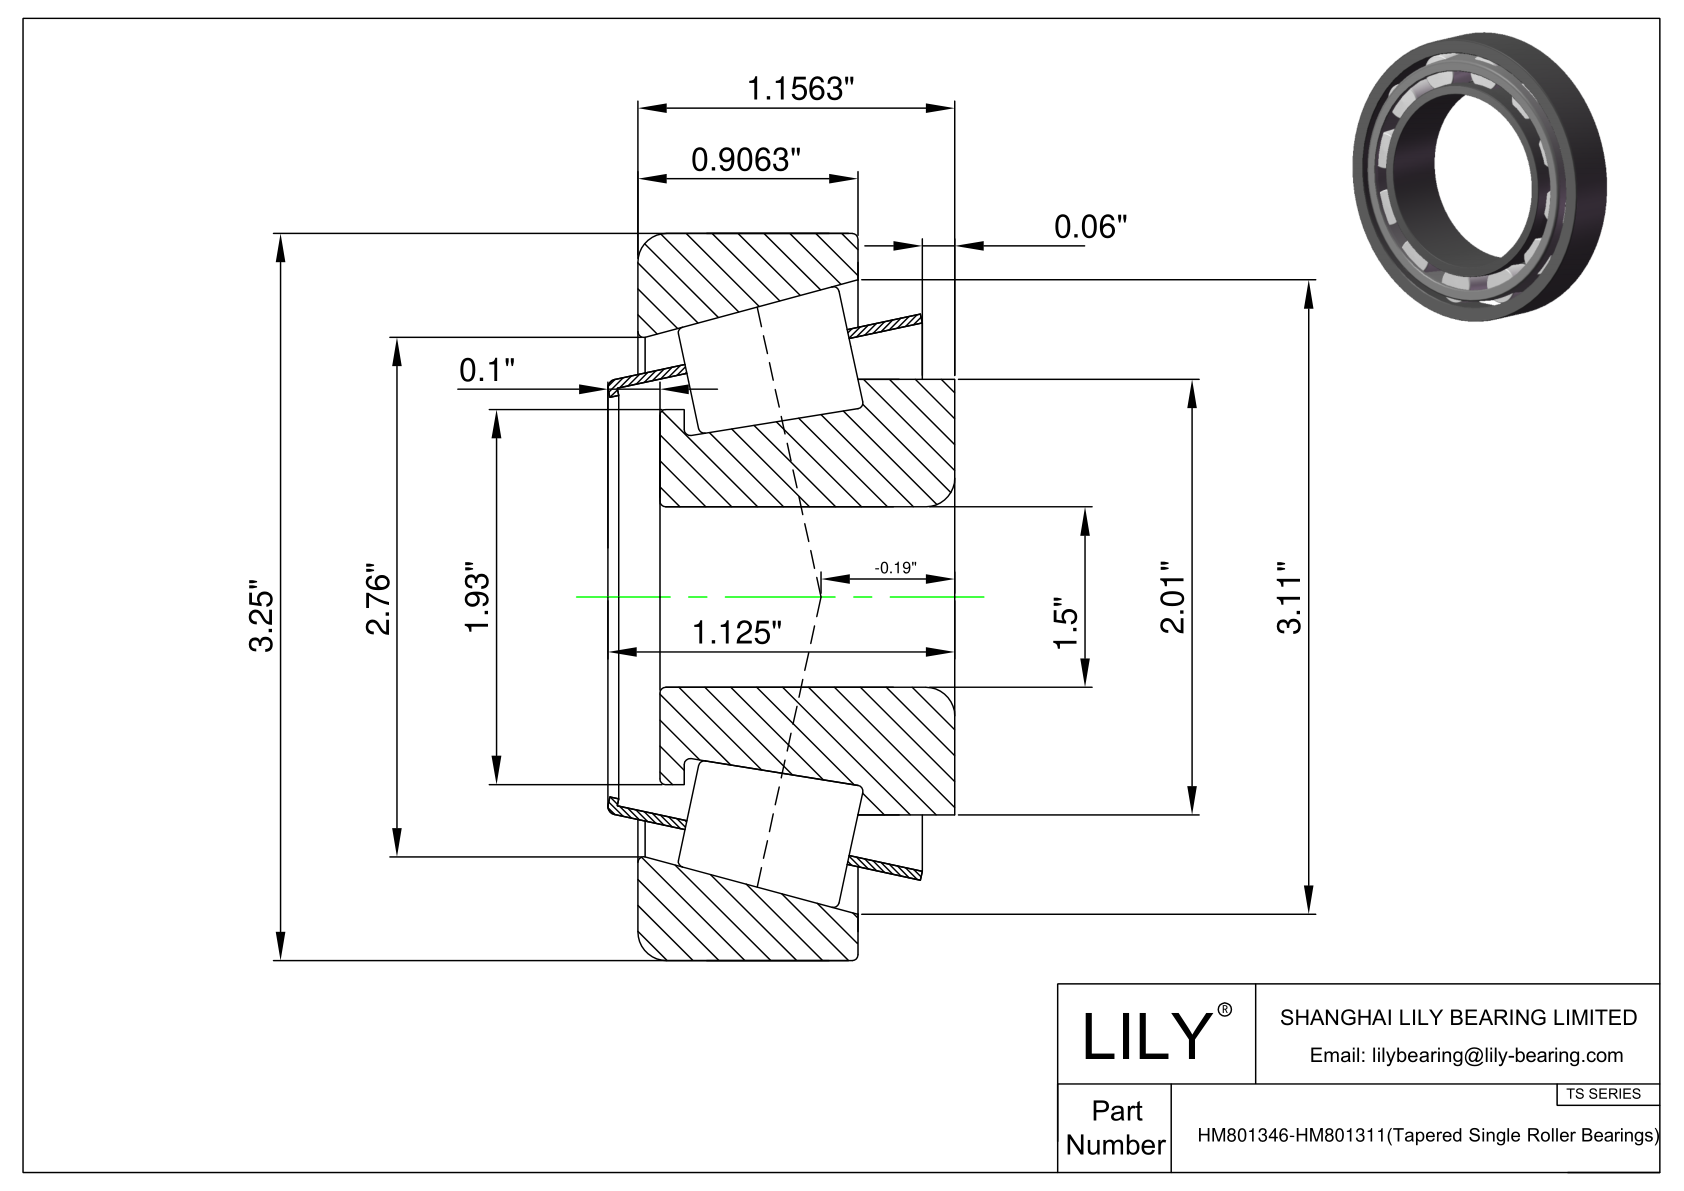 HM801346-HM801311 TS (Tapered Single Roller Bearings) (Imperial) cad drawing